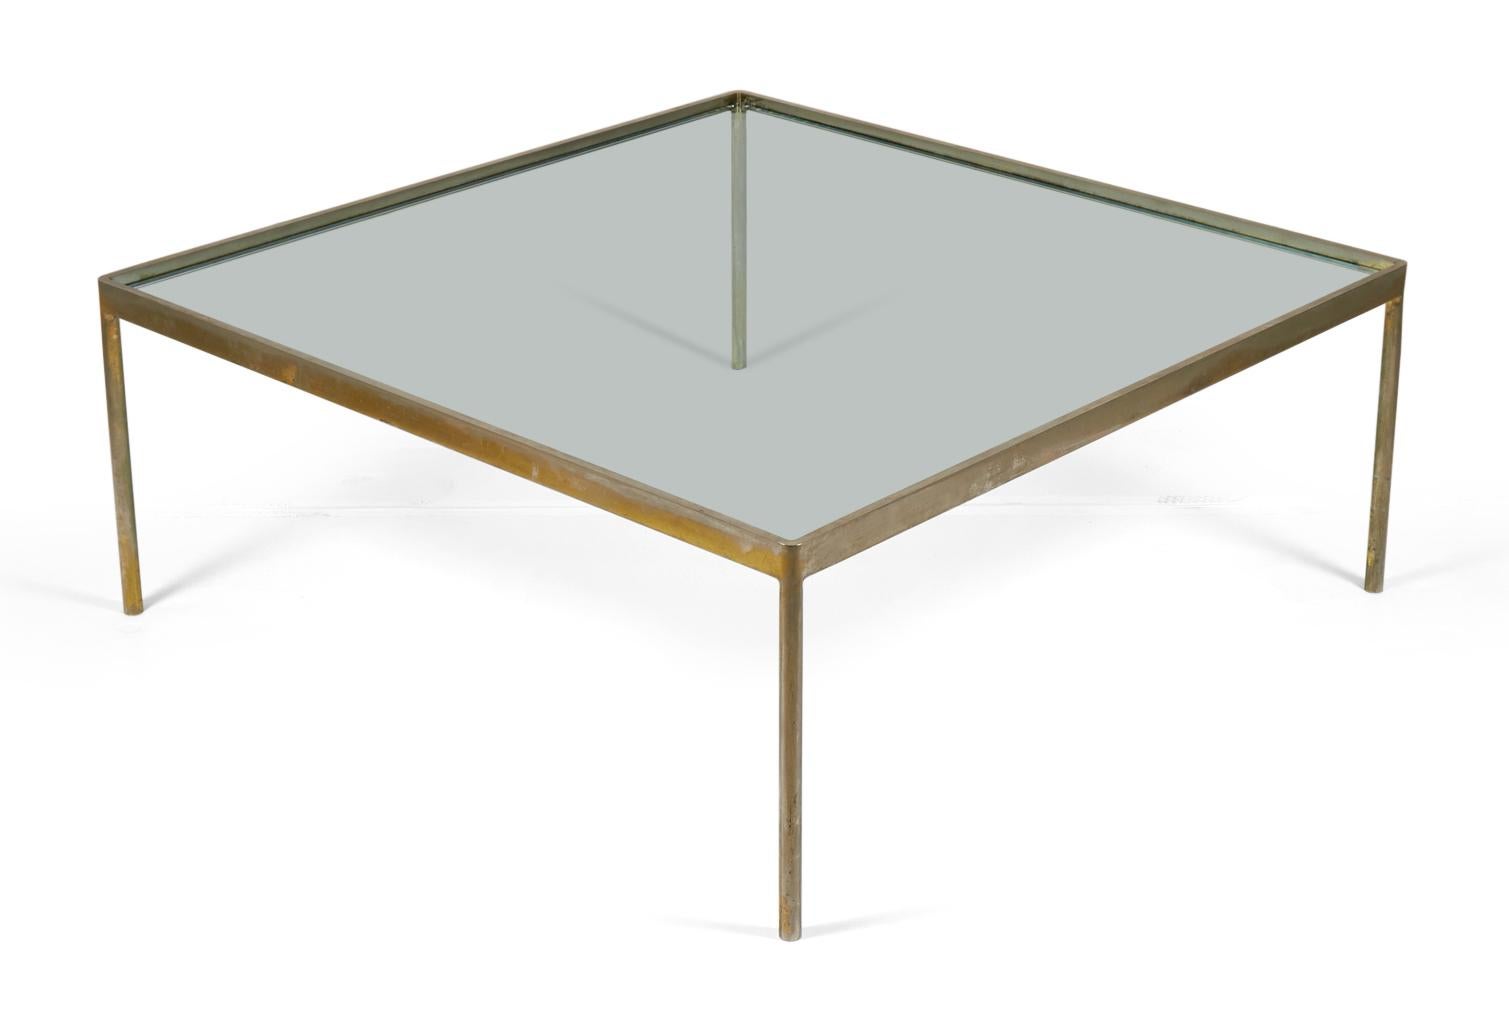 Kibrel S. Terry for Scope Reductive Square Nickel Cocktail / Coffee Table In Good Condition For Sale In New York, NY